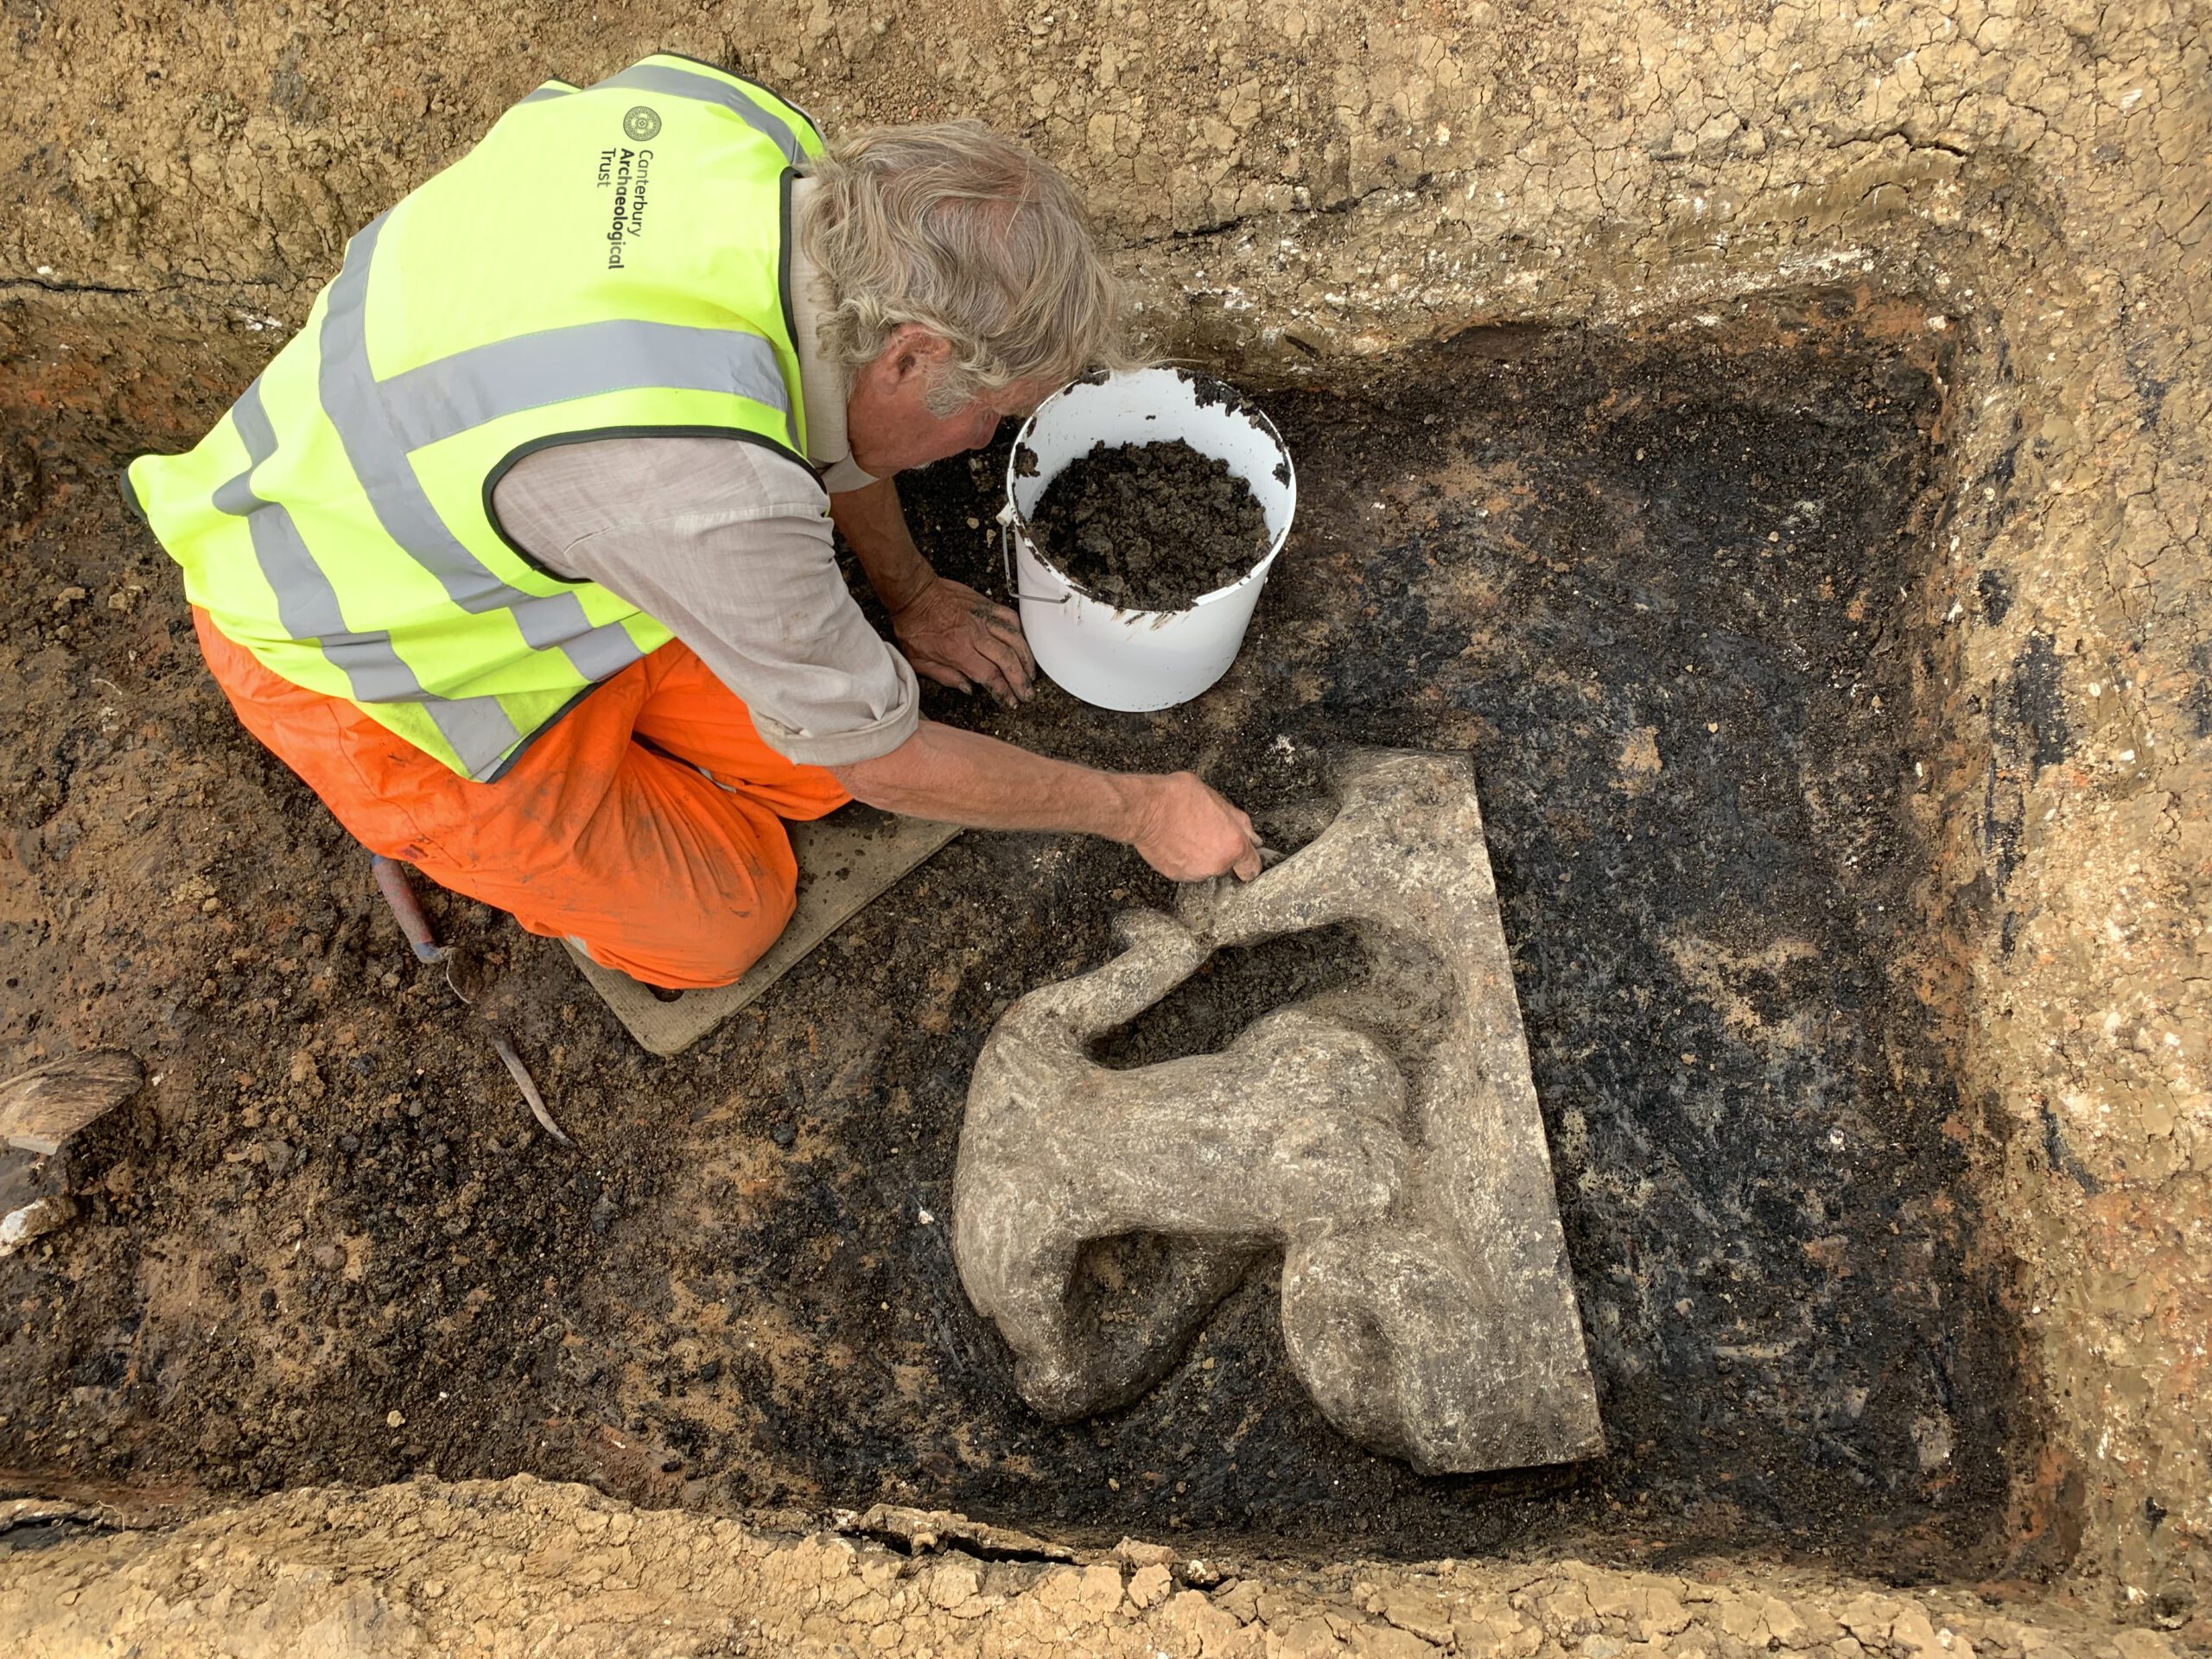 Roman statue of Triton discovered during archaeological excavations in Teynham Kent